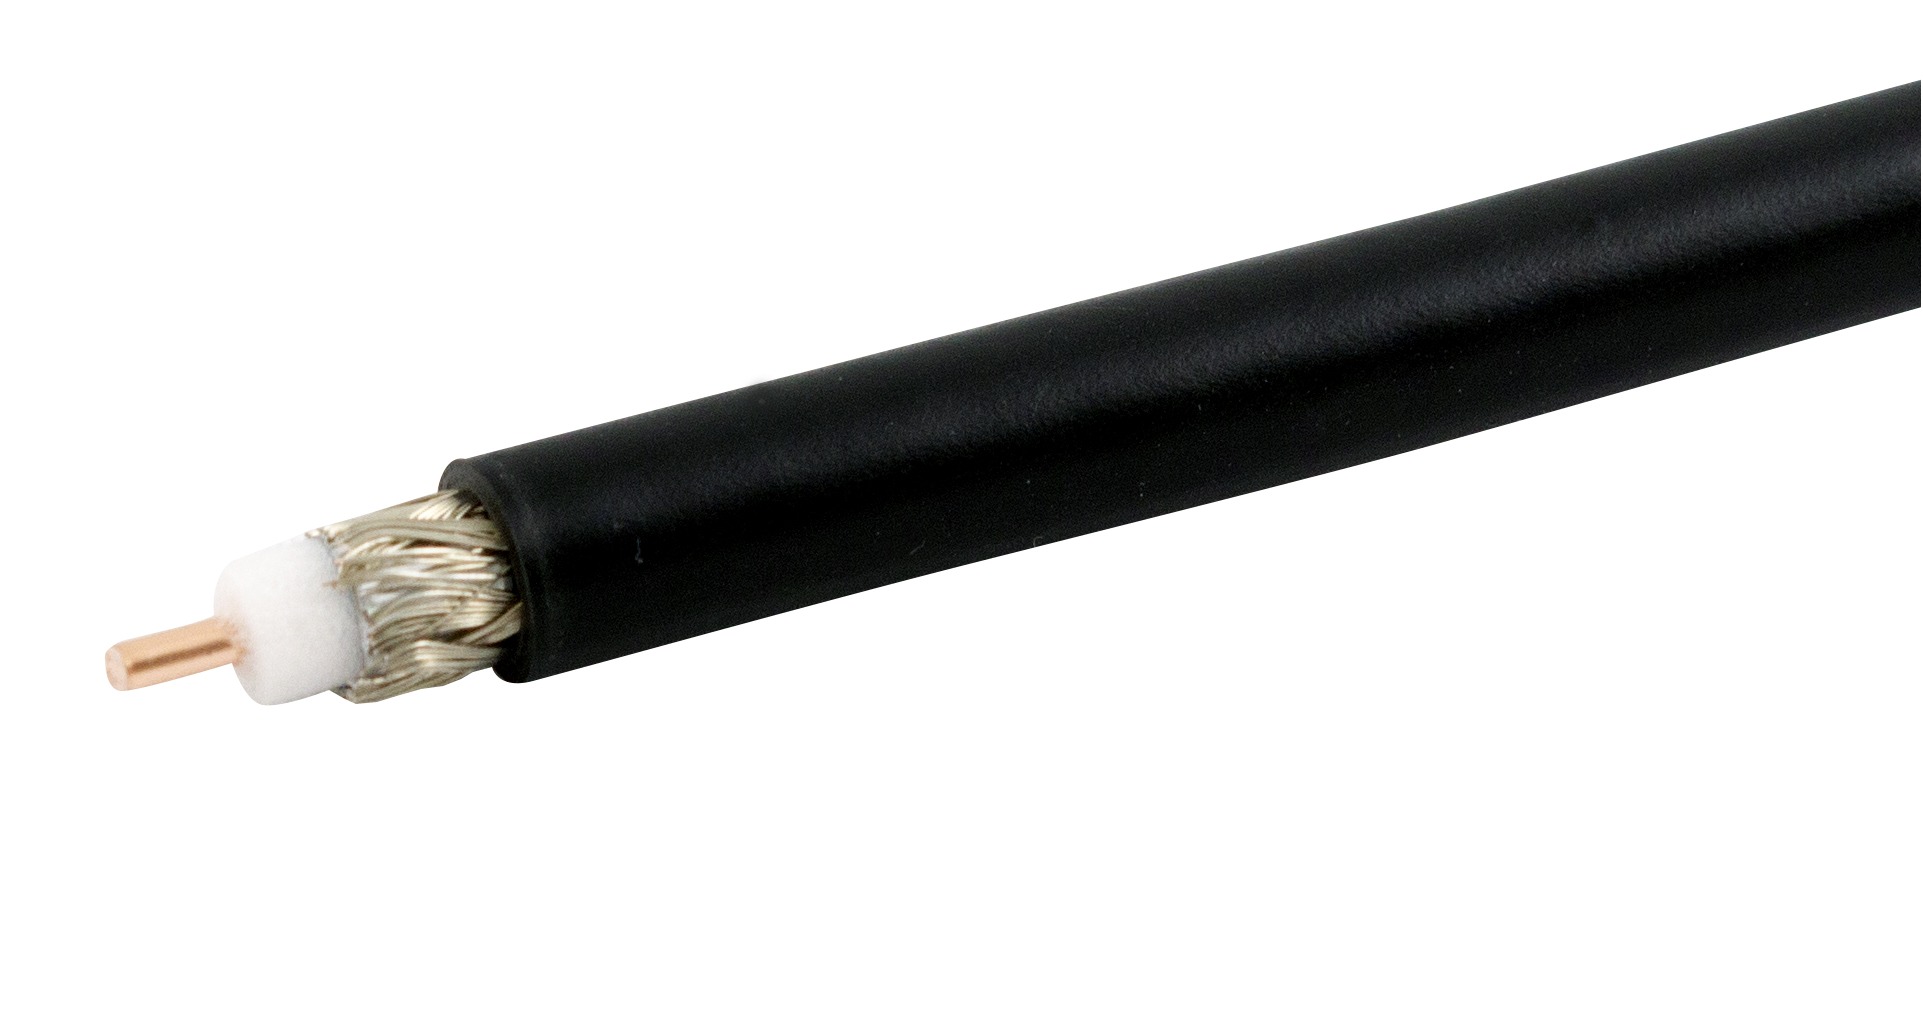 Low Loss RF coaxial cable assemblies